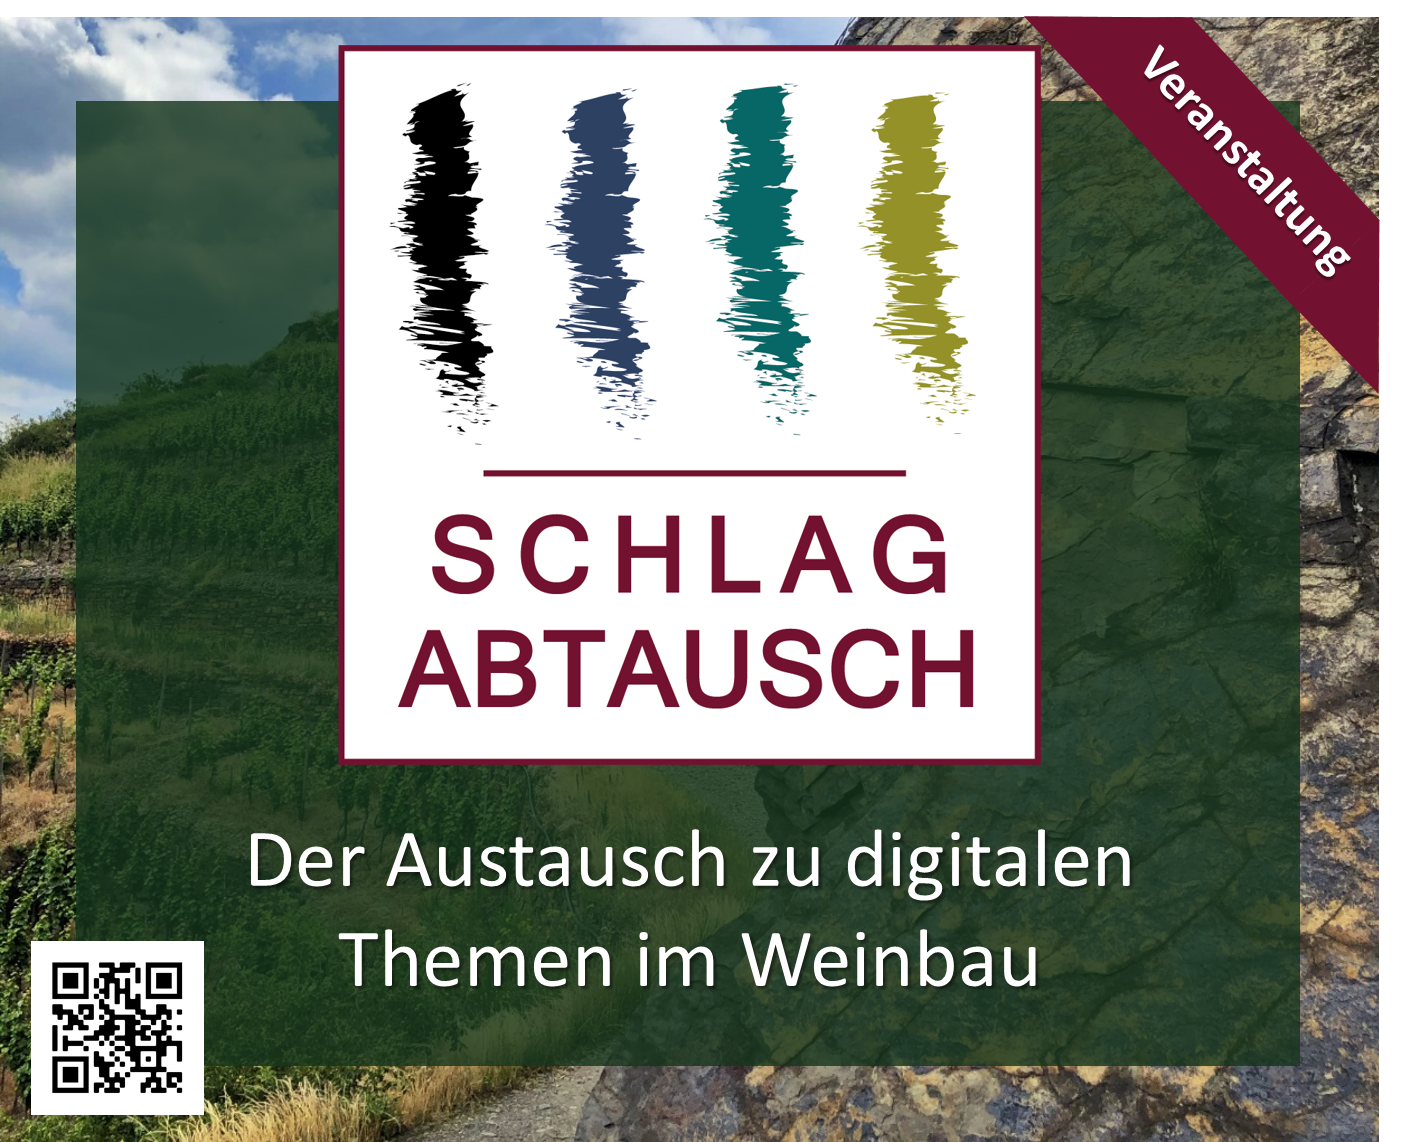 You are currently viewing Schlagabtausch